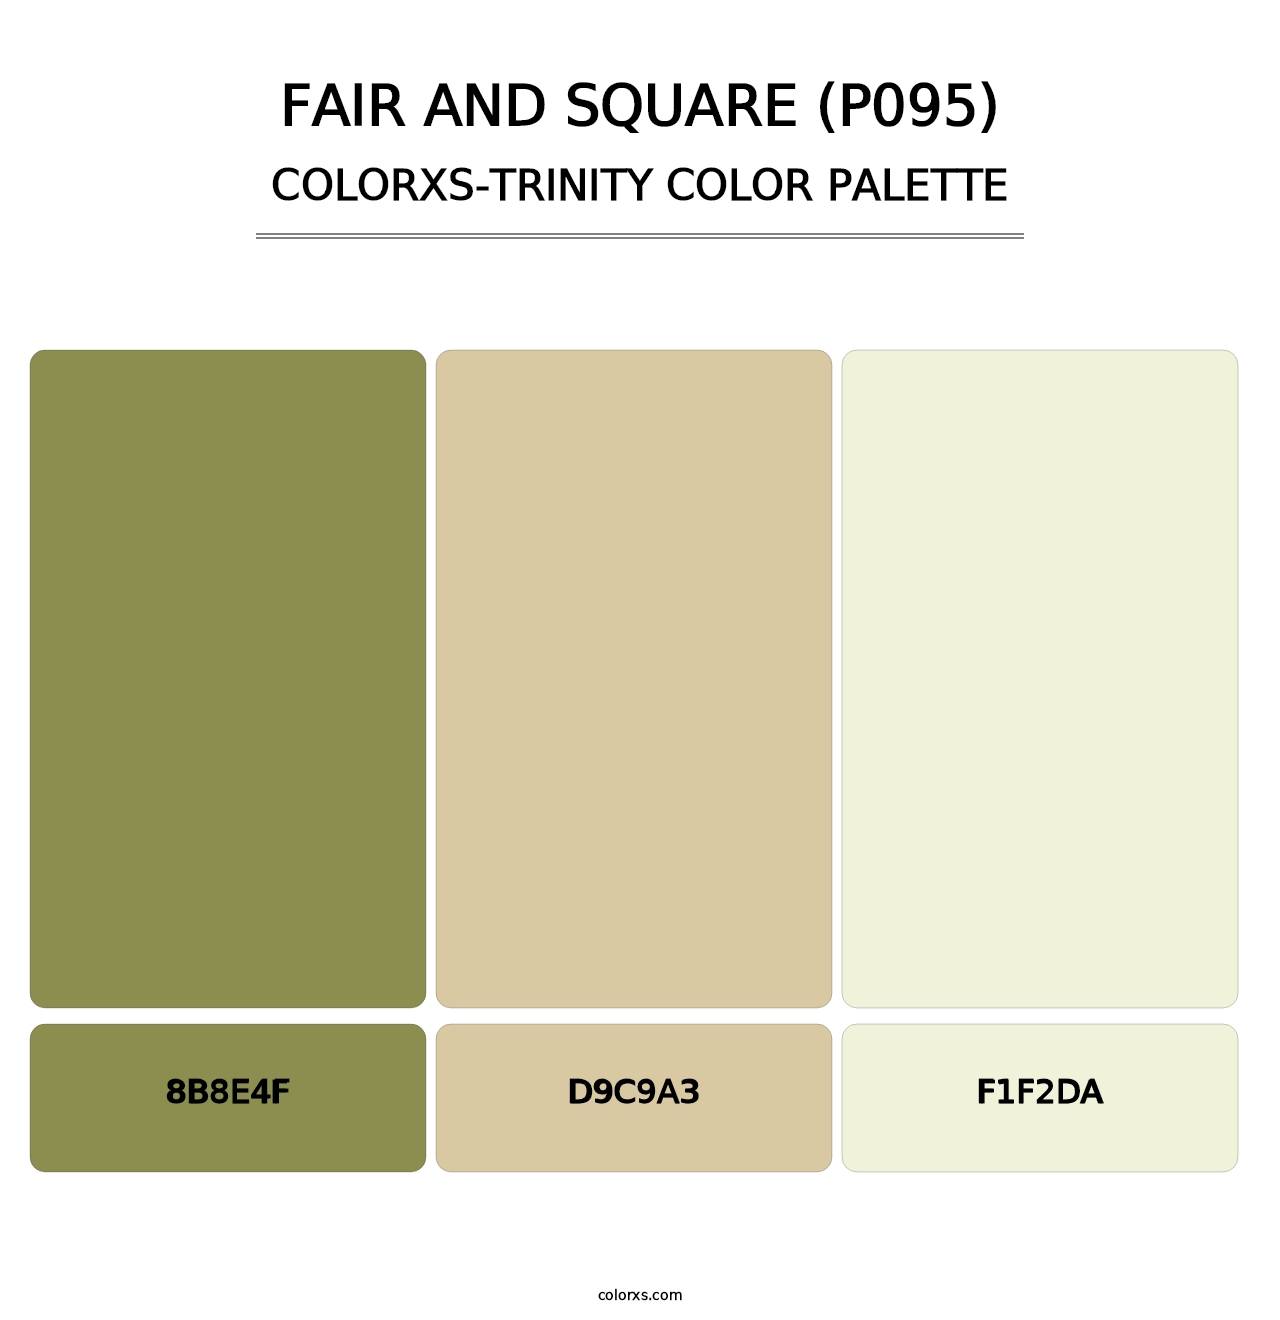 Fair and Square (P095) - Colorxs Trinity Palette